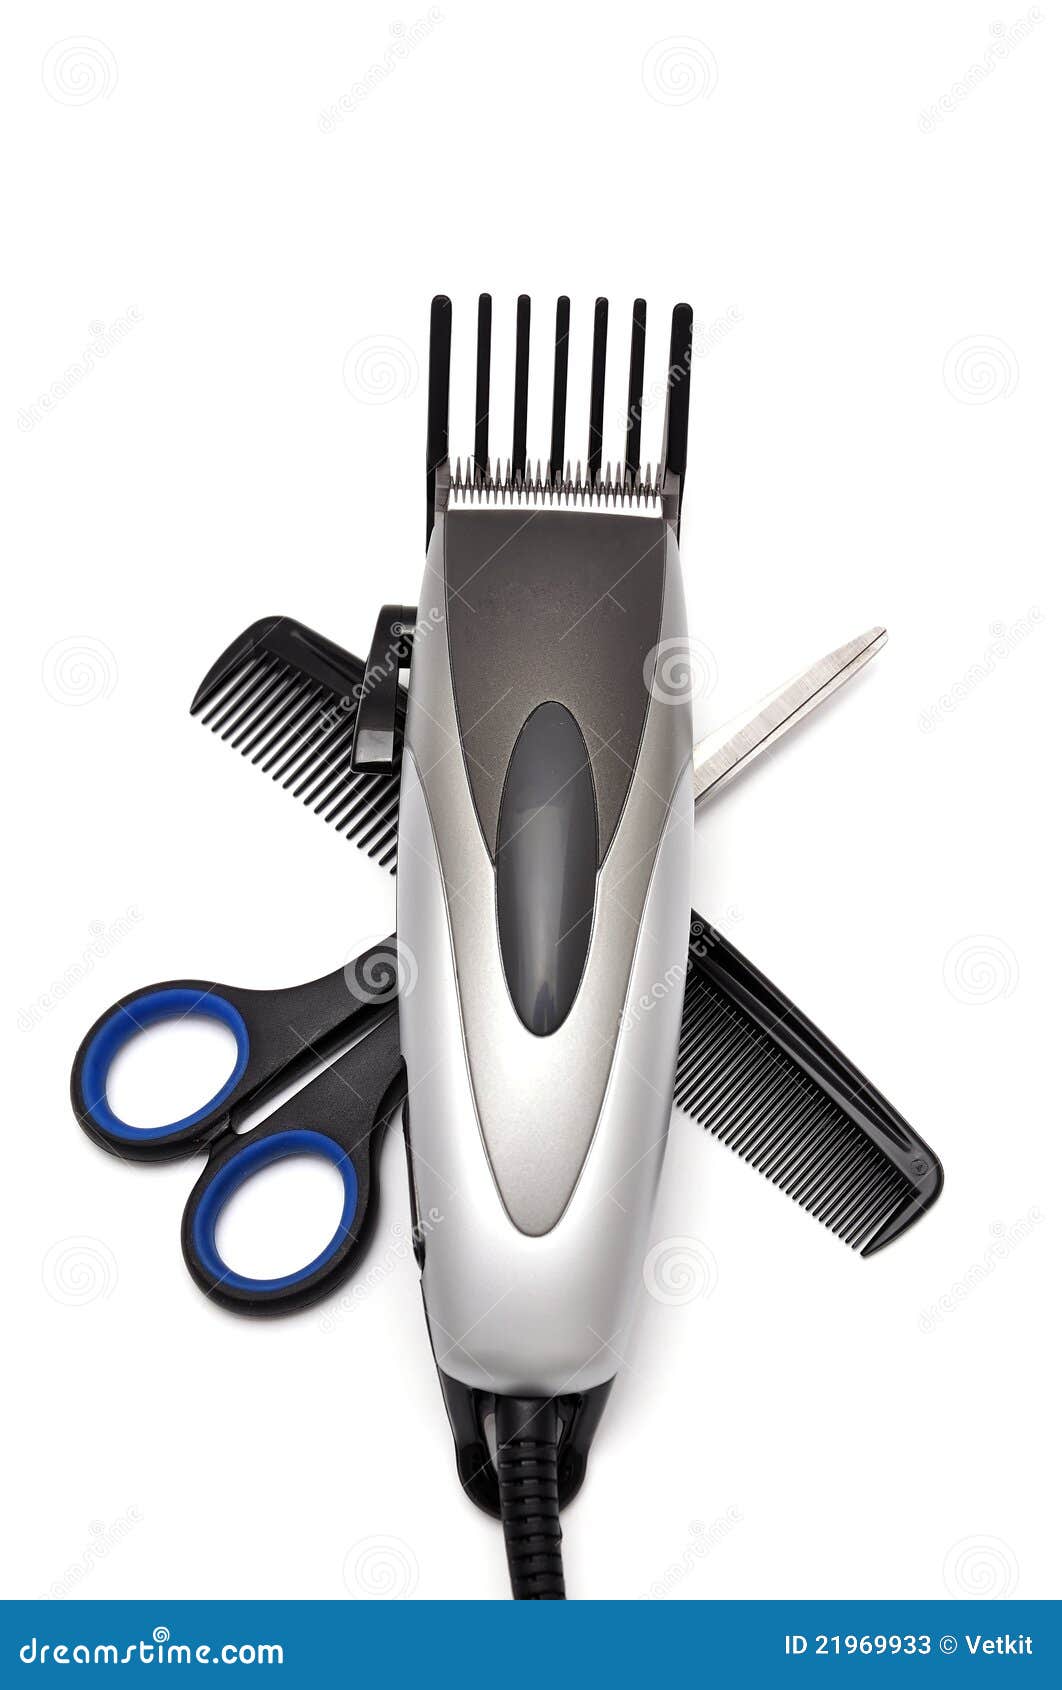 remington hair clippers target